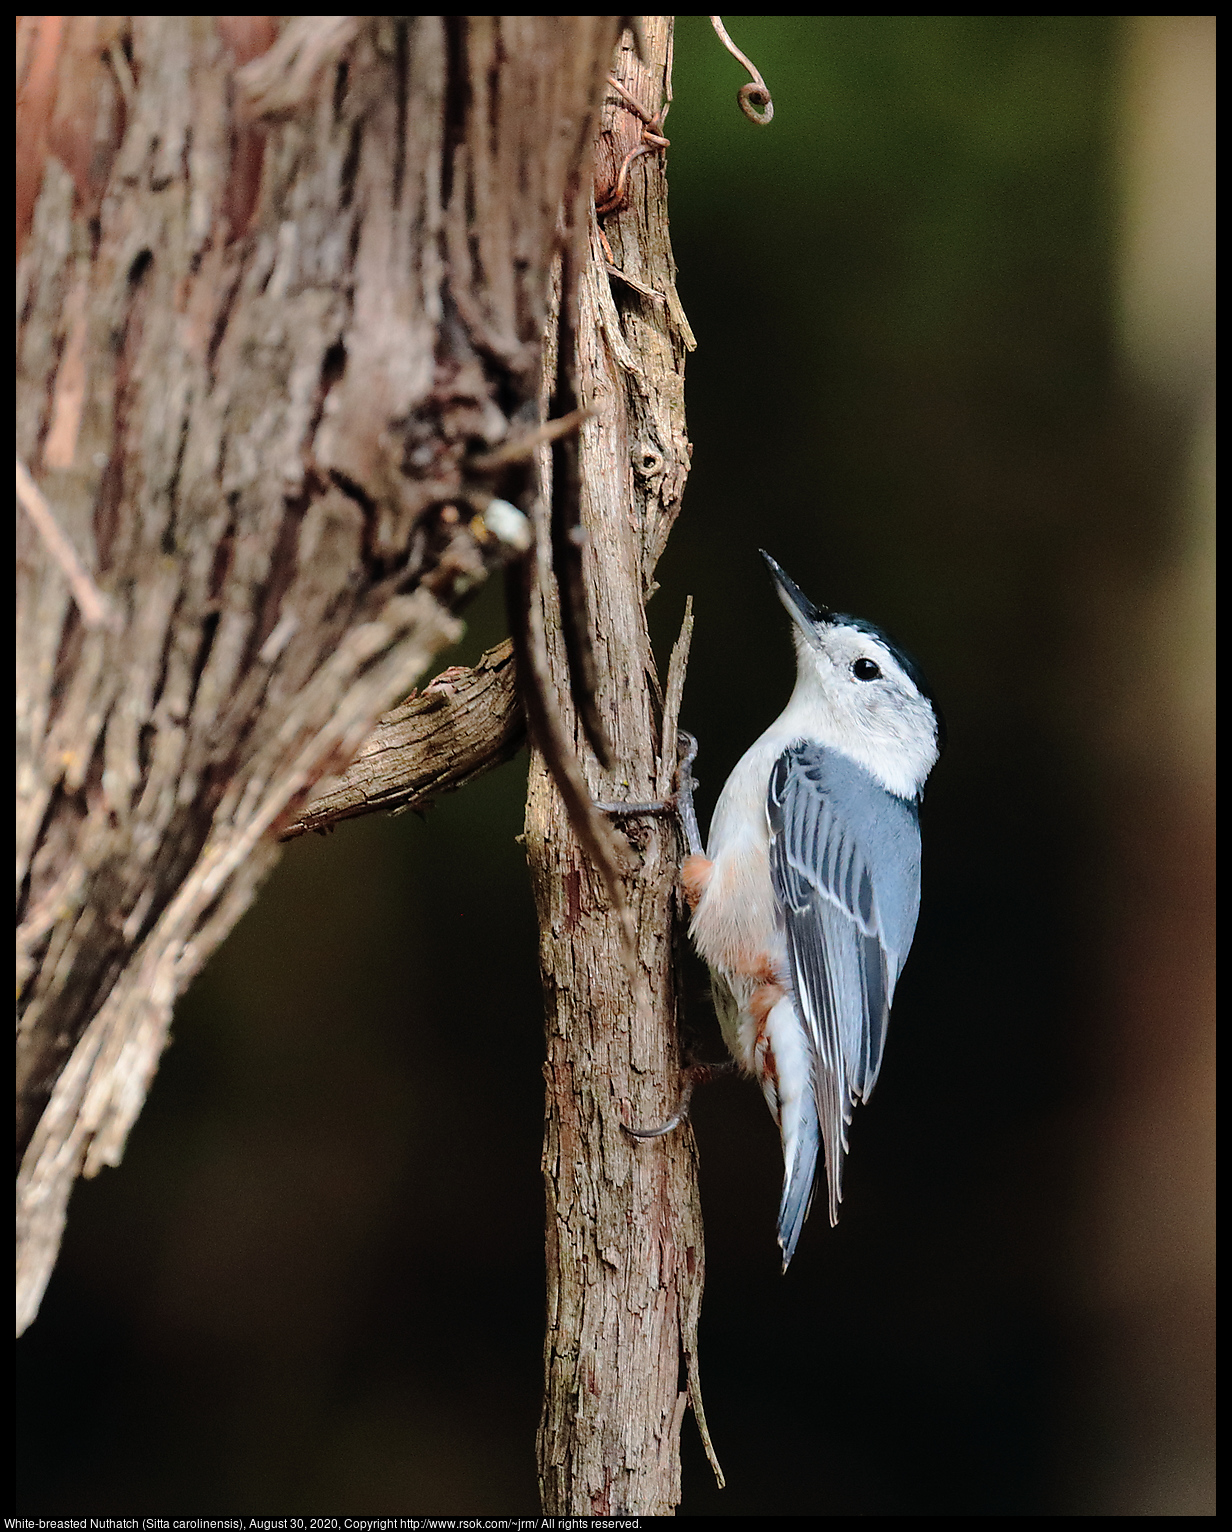 White-breasted Nuthatch (Sitta carolinensis), August 30, 2020